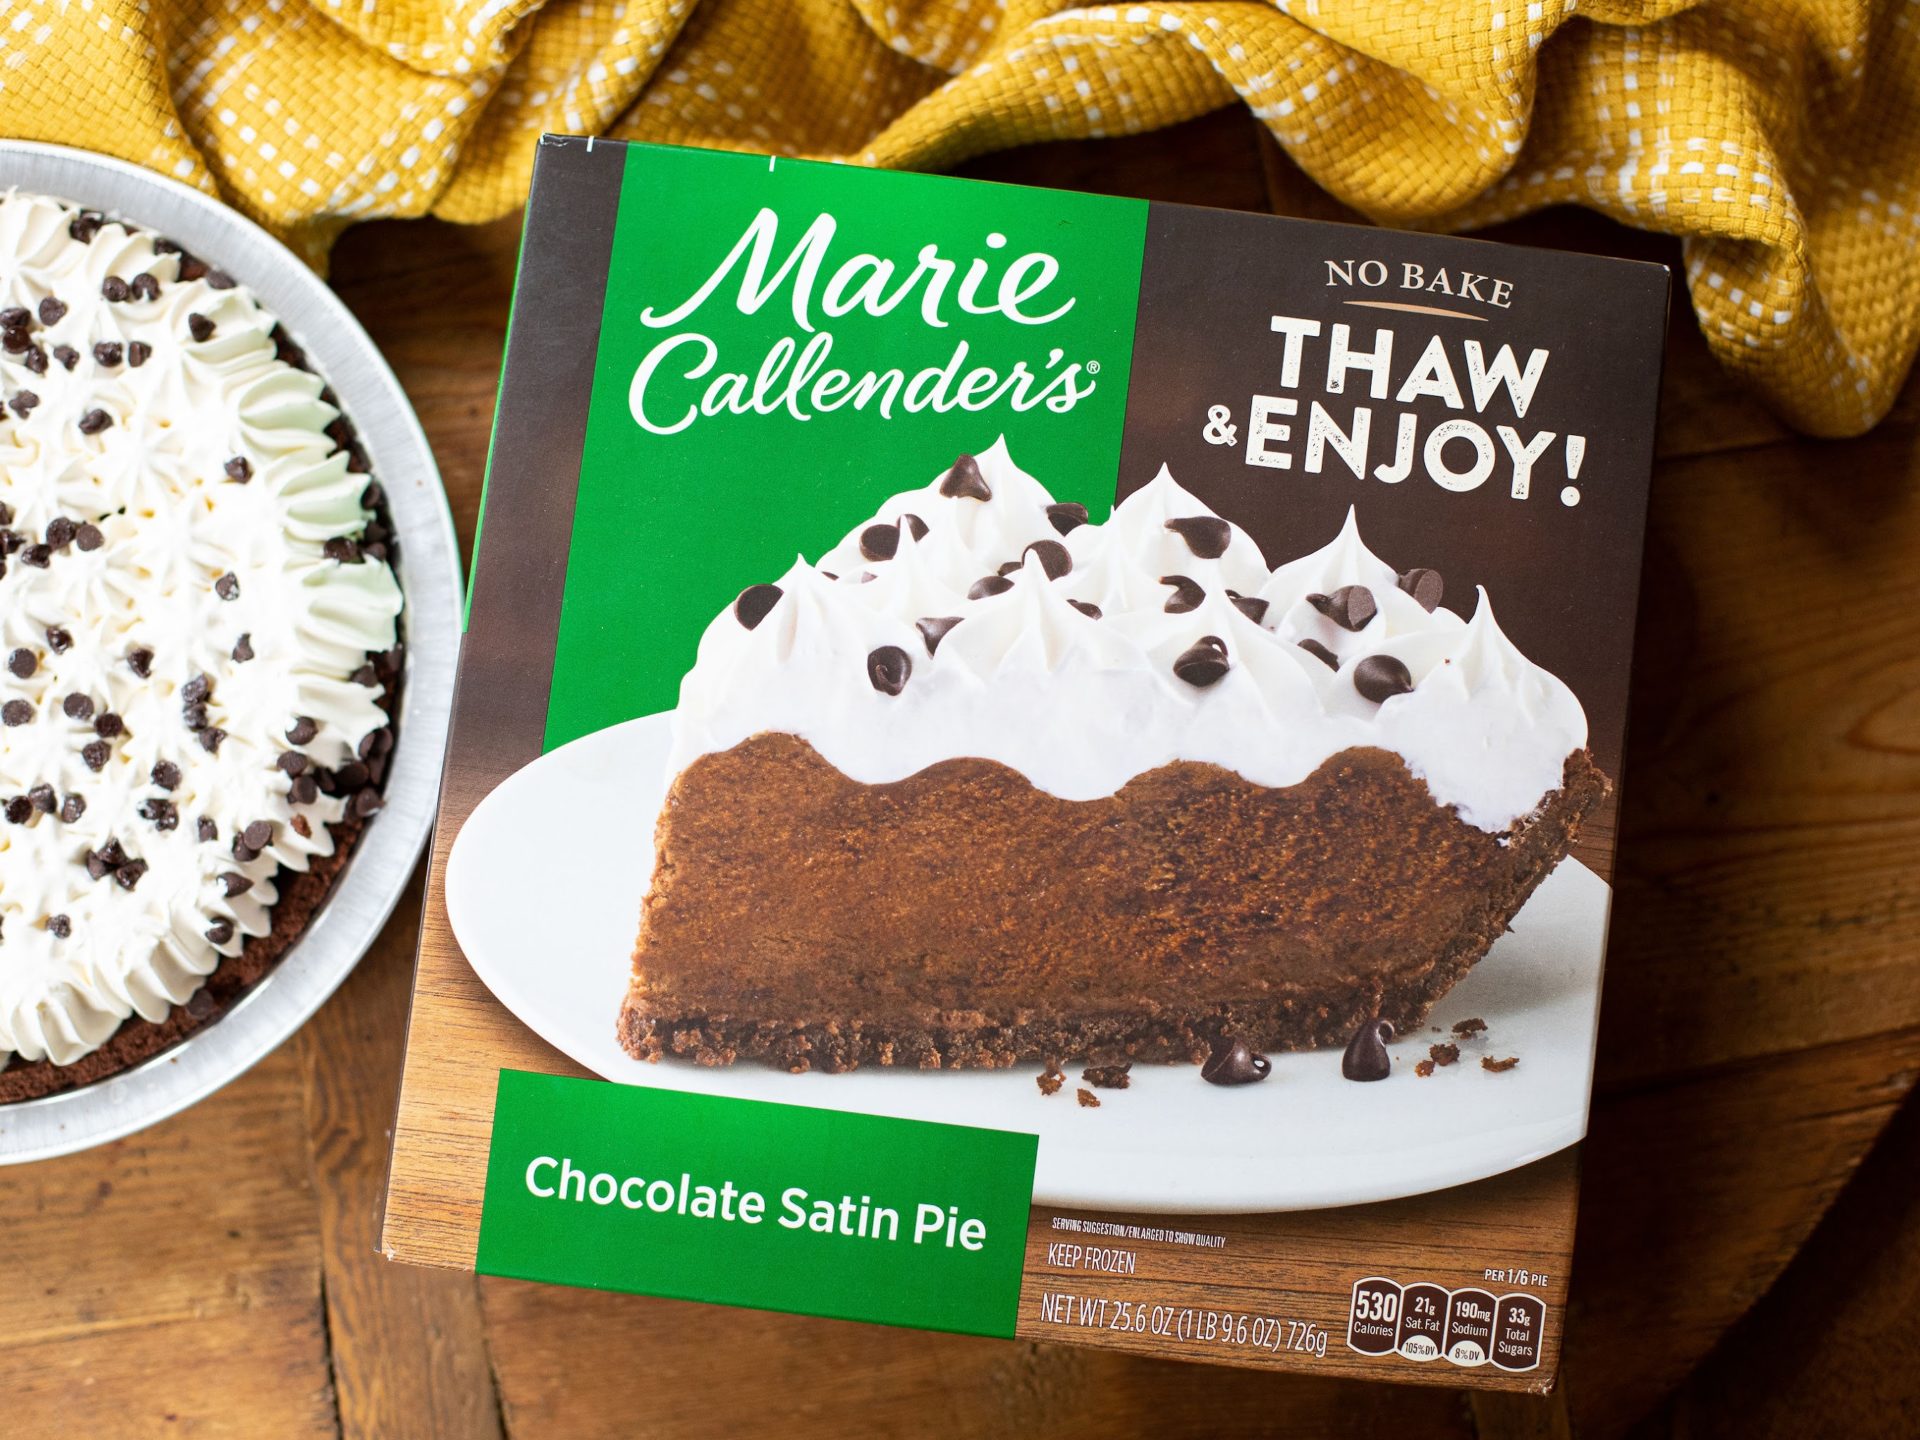 Marie Callender’s & Edwards Pies Just $4.99 At Kroger (Regular Price $7.99 to $10.99)